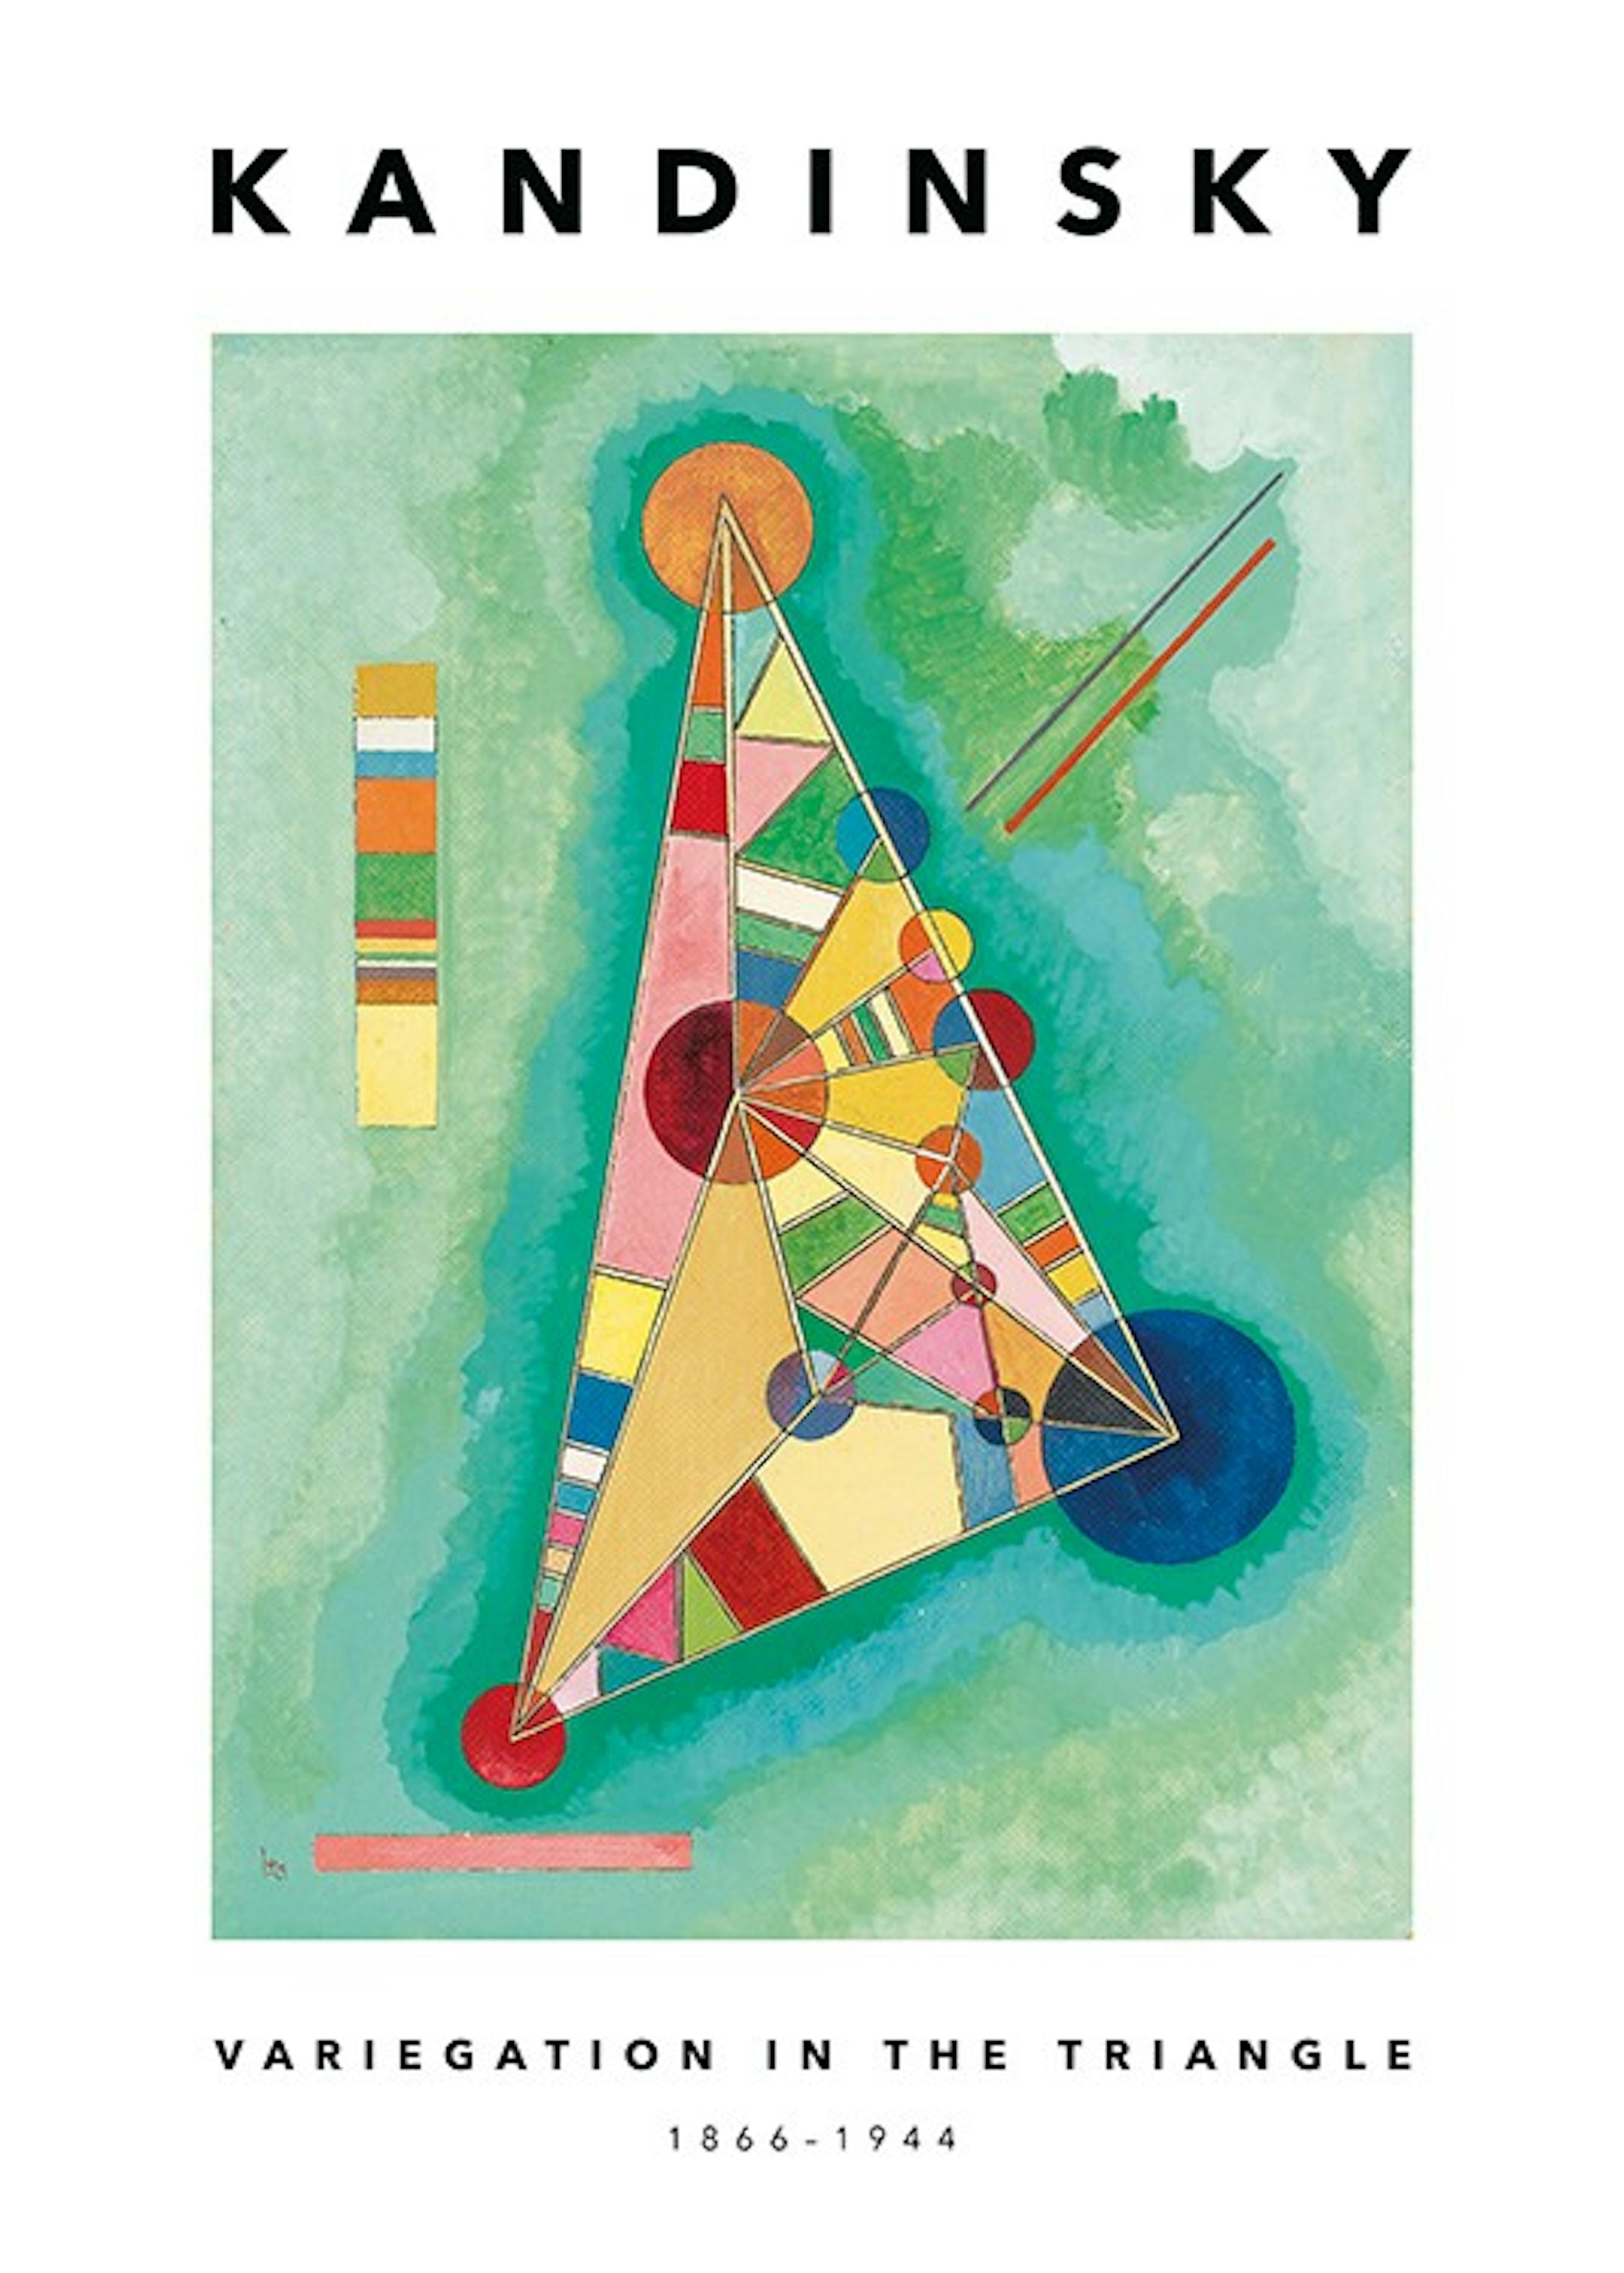 Kandinsky - Variegation in the Triangle Print